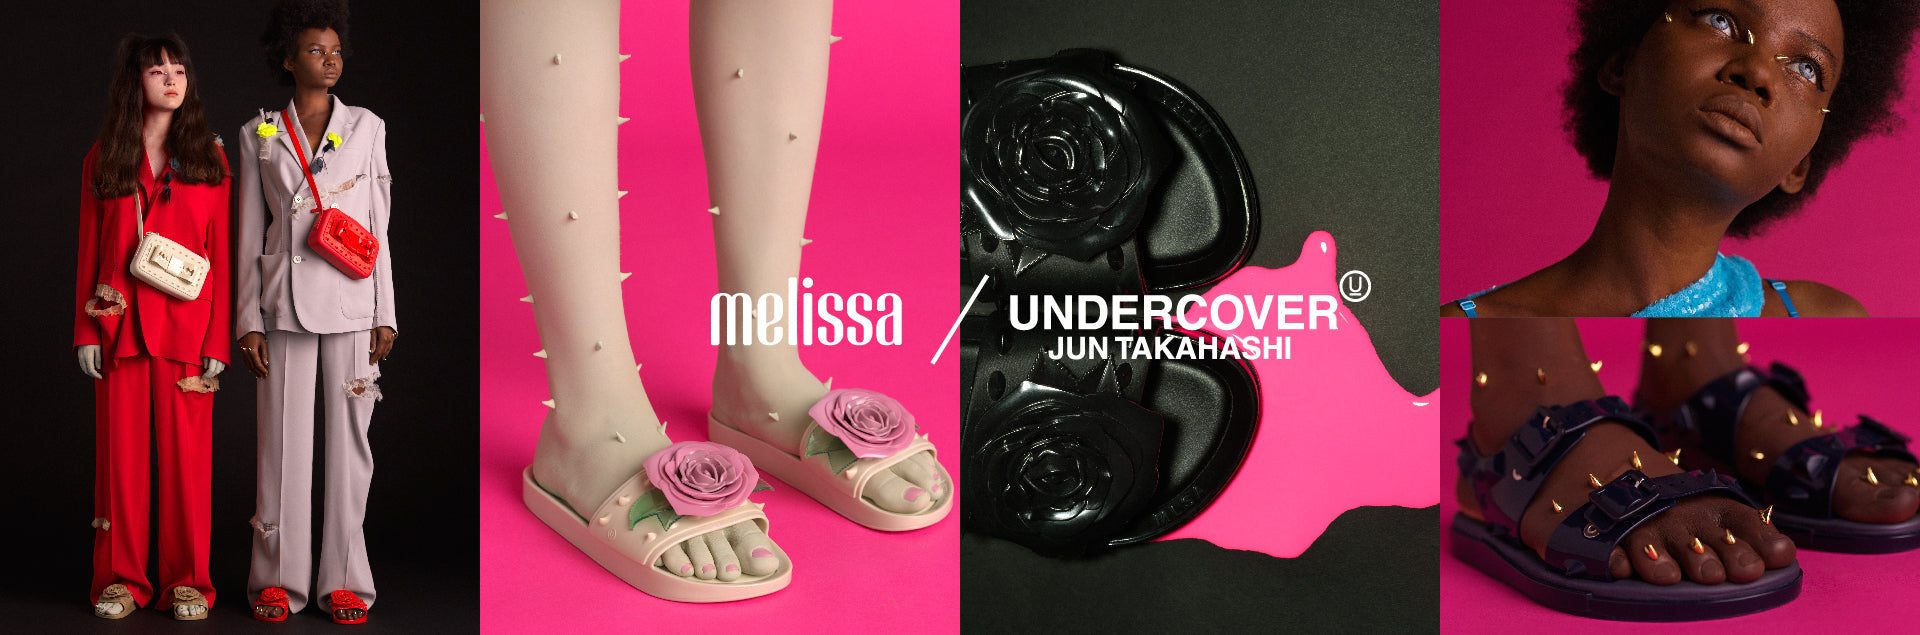 Melissa Goes Undercover